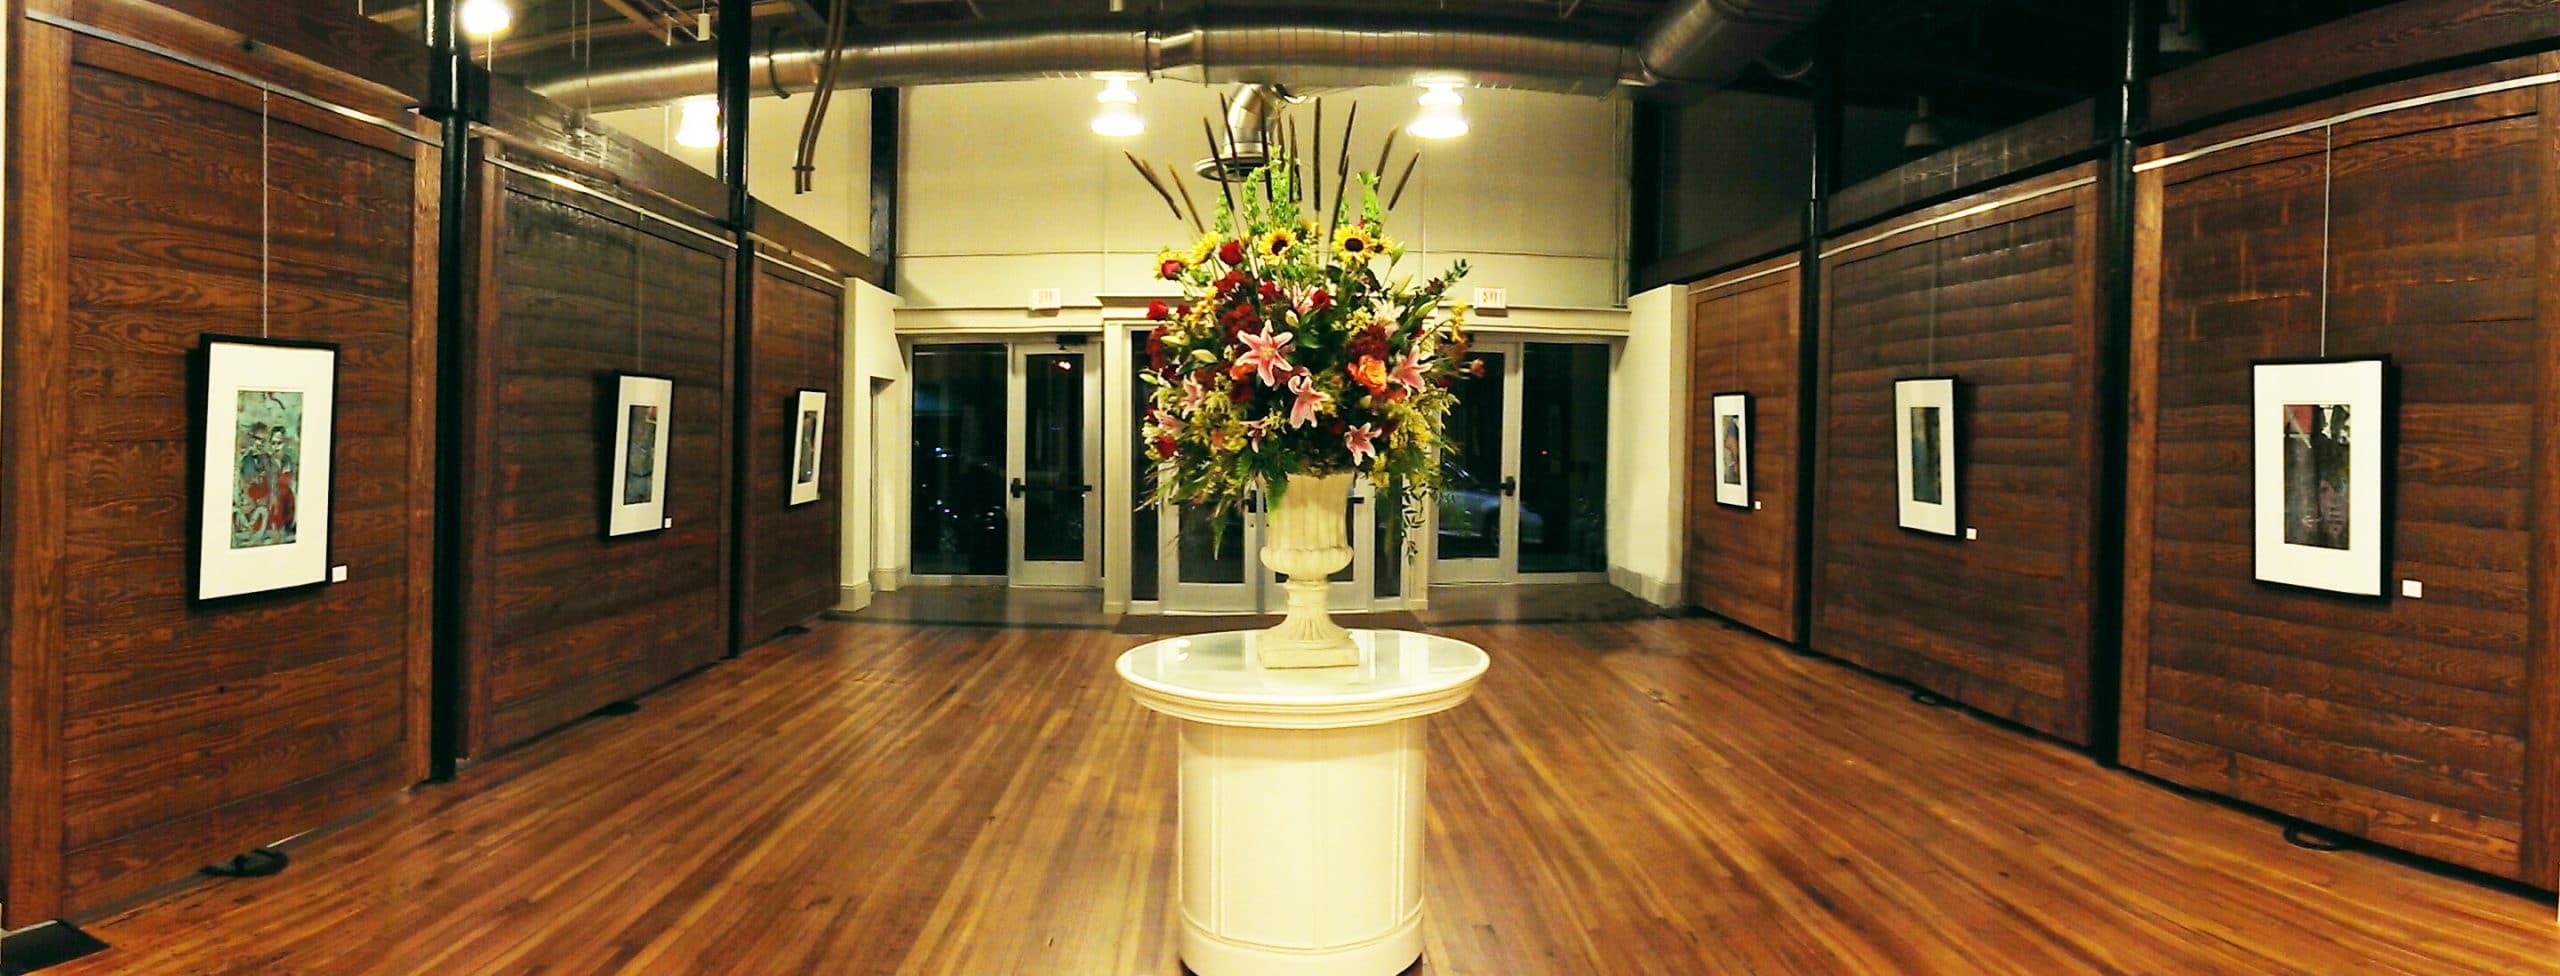 CAC Gallery room with wood floors and floral centerpiece on white pedestal.